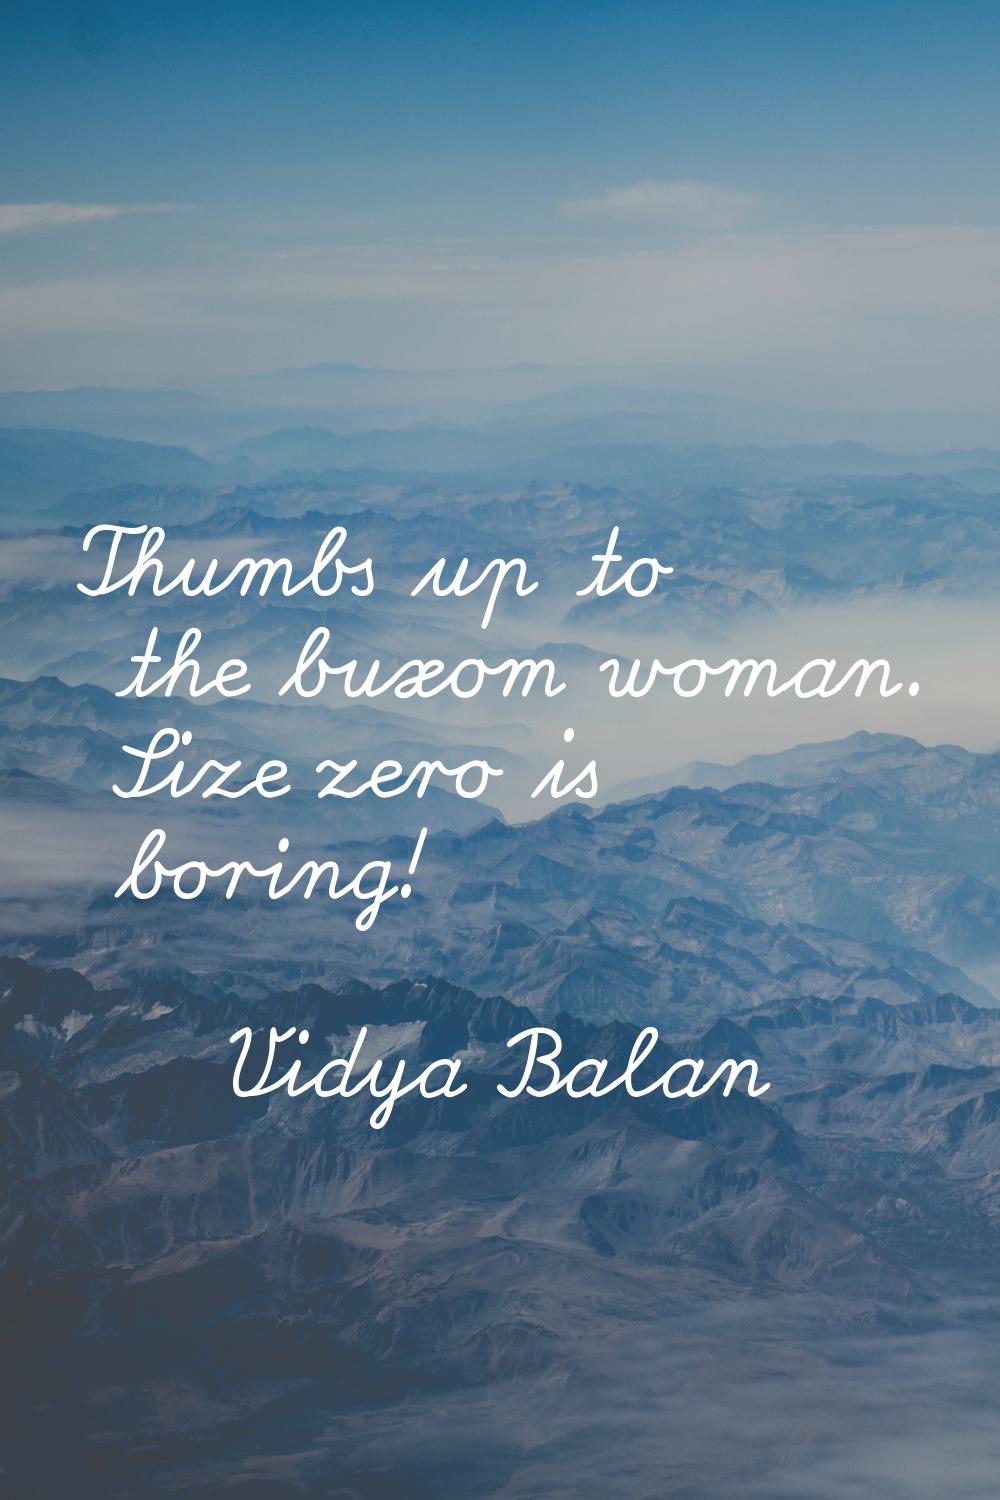 Thumbs up to the buxom woman. Size zero is boring!